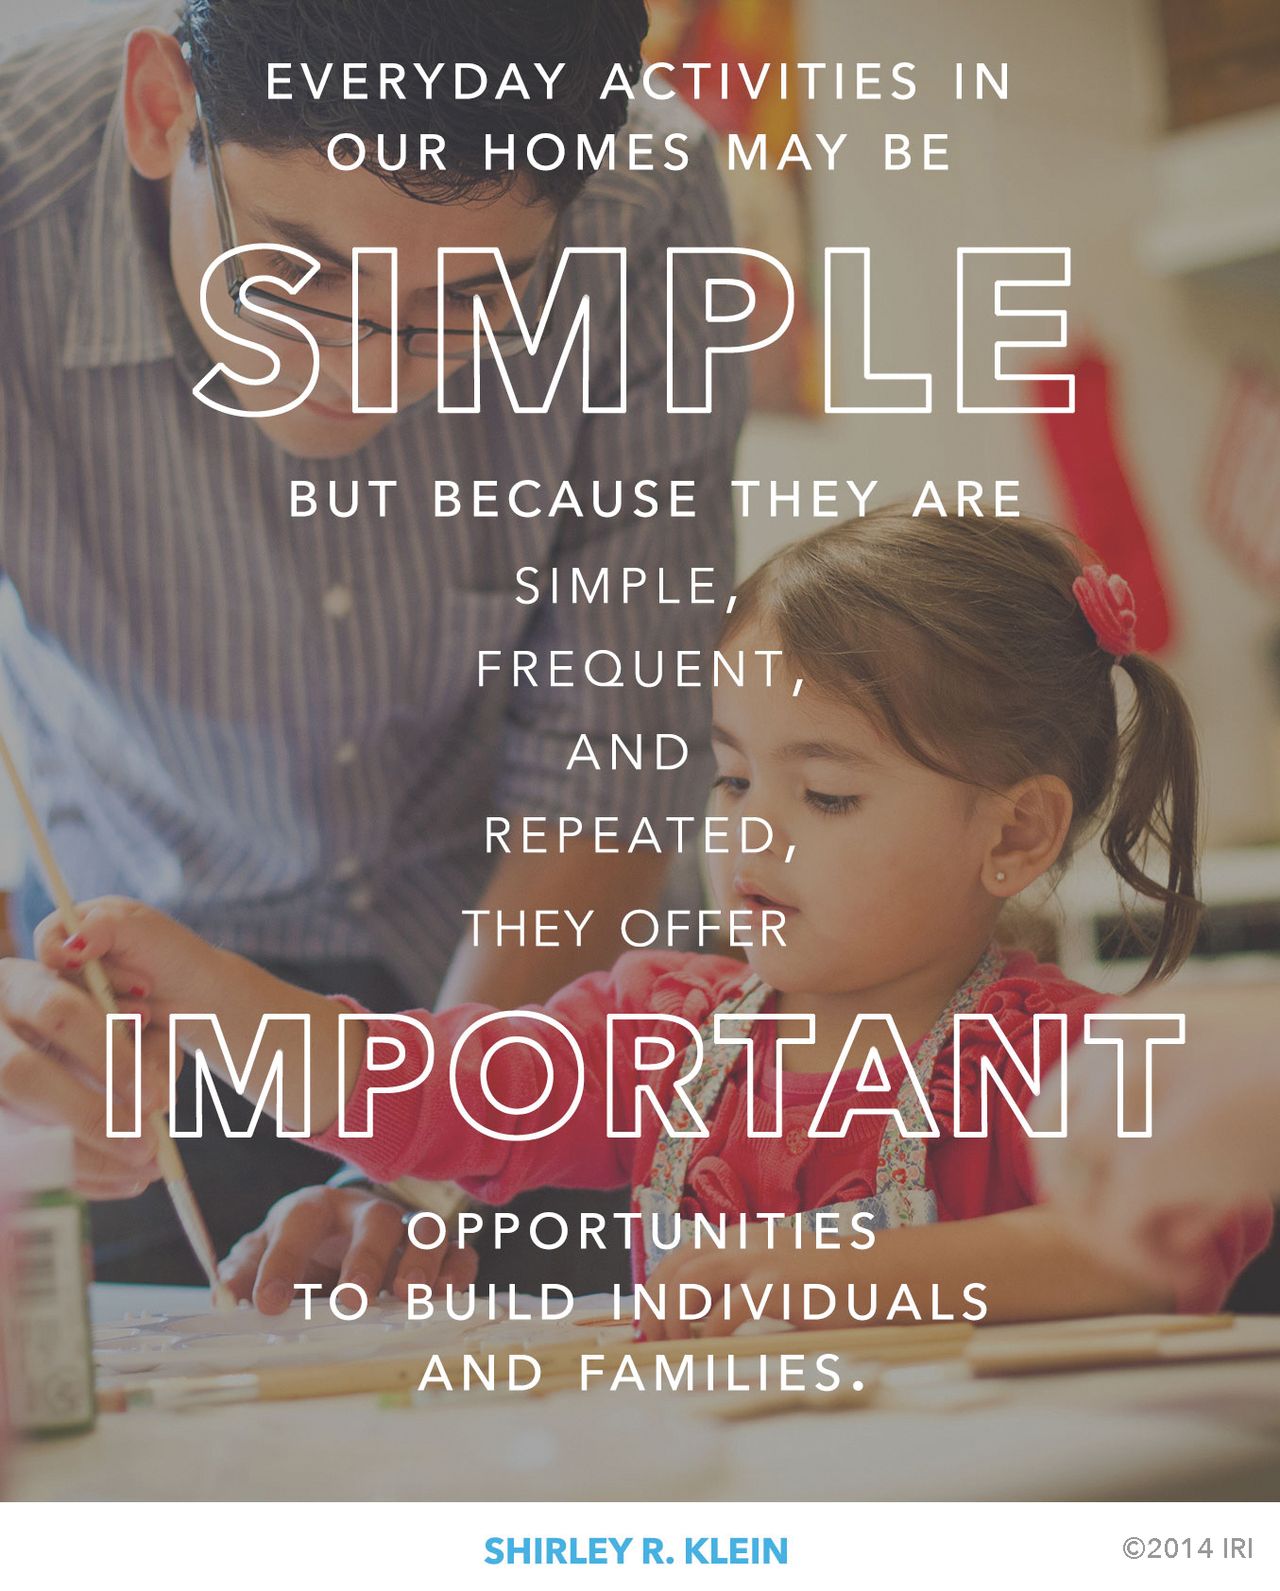 “Everyday activities in our homes may be simple but because they are simple, frequent, and repeated, they offer important opportunities to build individuals and families.”—Shirley R. Klein, “Three Tools to Build a Sacred Home”